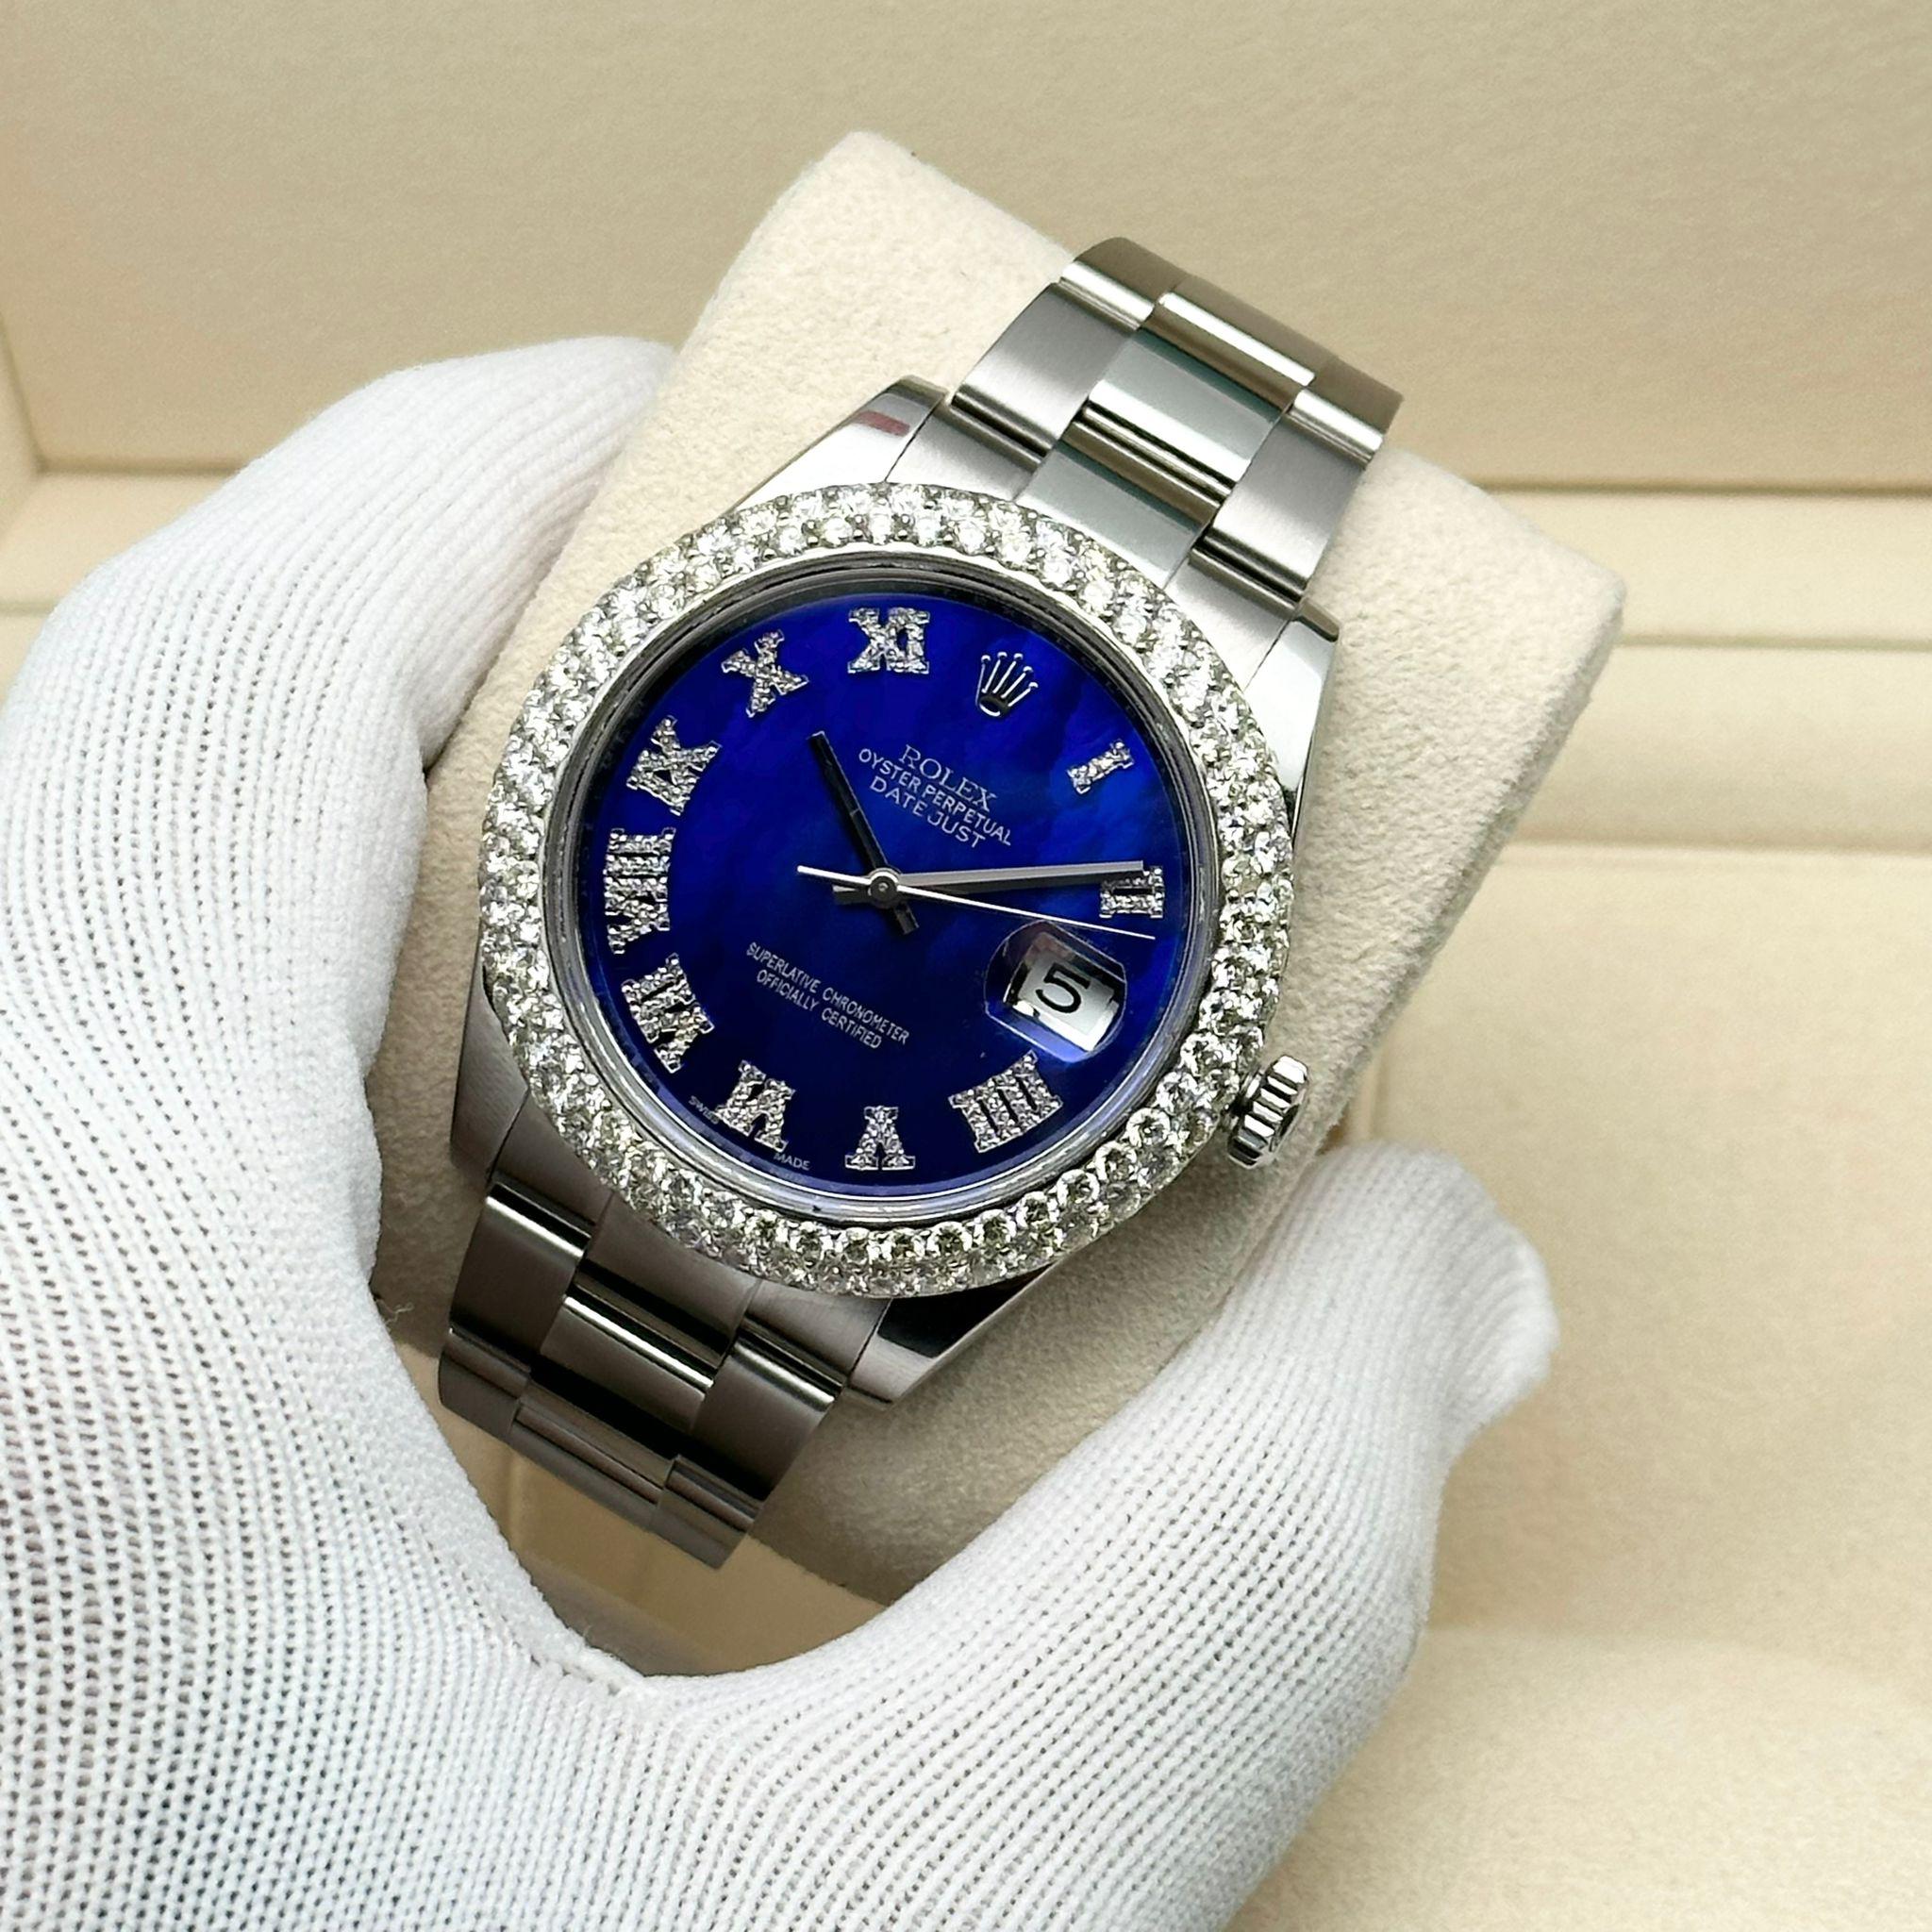 Aftermarket Diamond Bezel and Dial weight total of 4.75 CT. The original box is included. No papers.

* Free Shipping within the USA
* Two-year warranty coverage
* 14-day return policy with a full refund. 
* Kindly be aware that international buyers